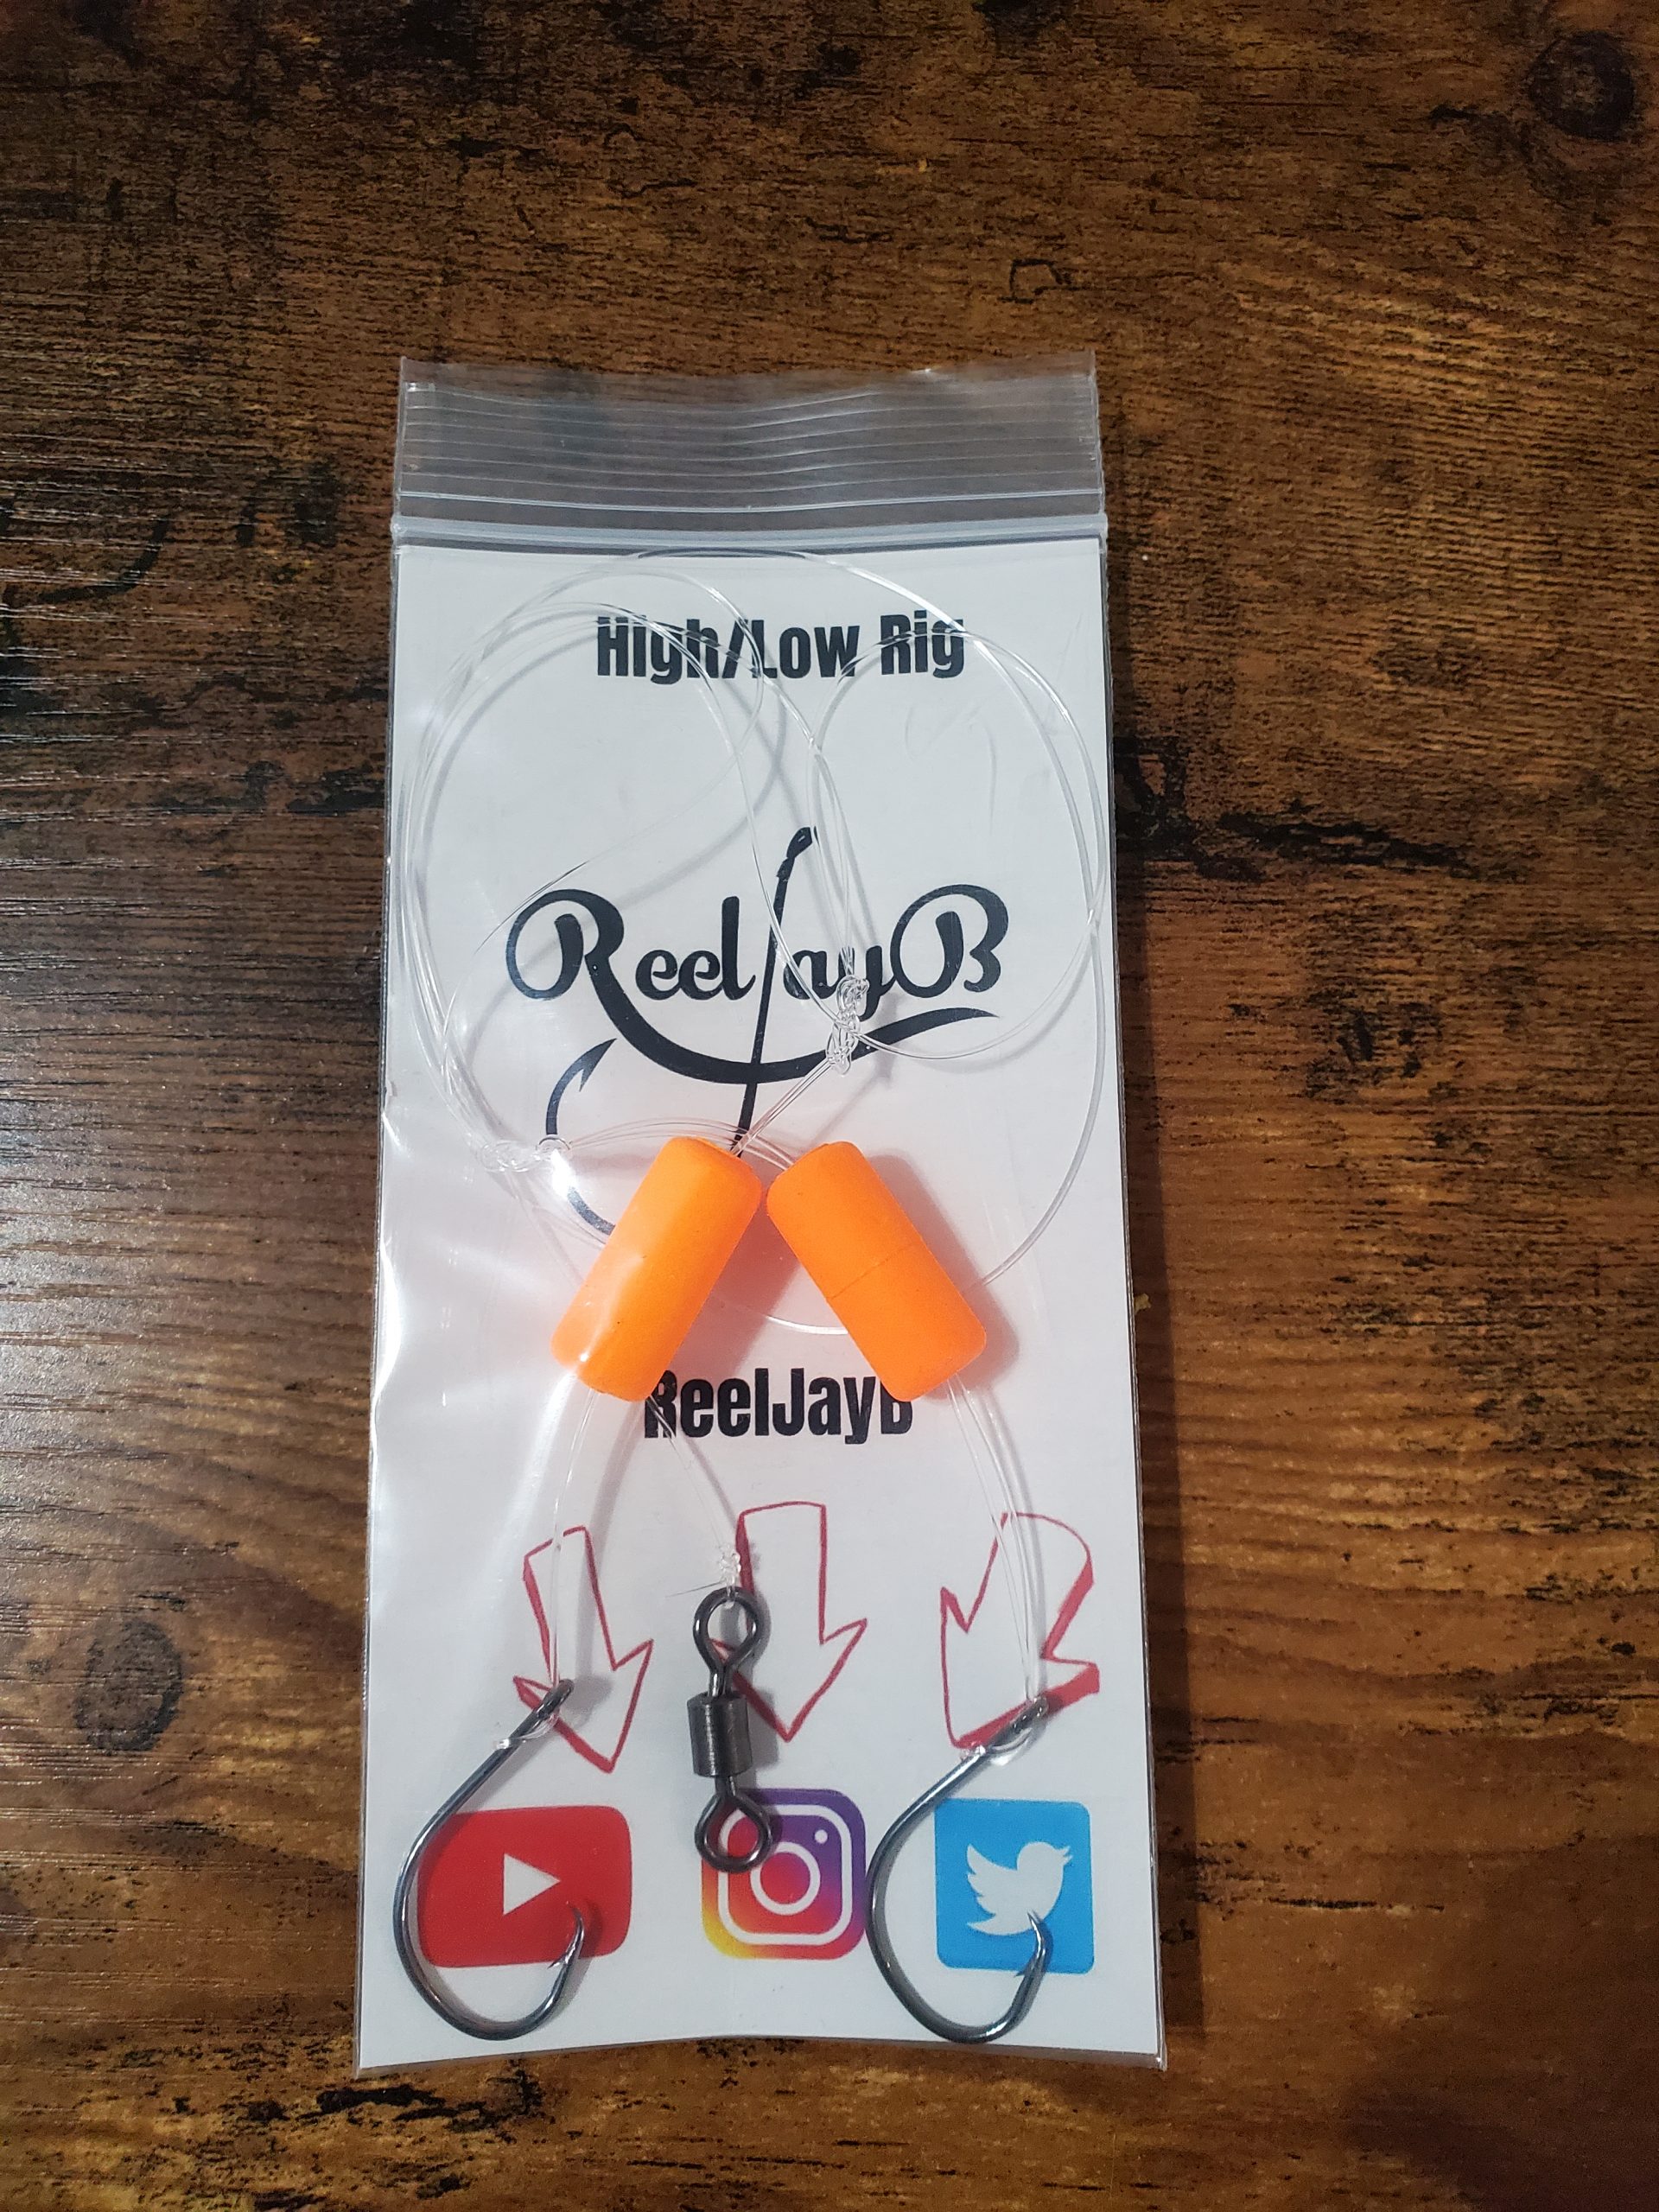 High/Low Rig, 2/0 Circle Hooks and Orange Floats